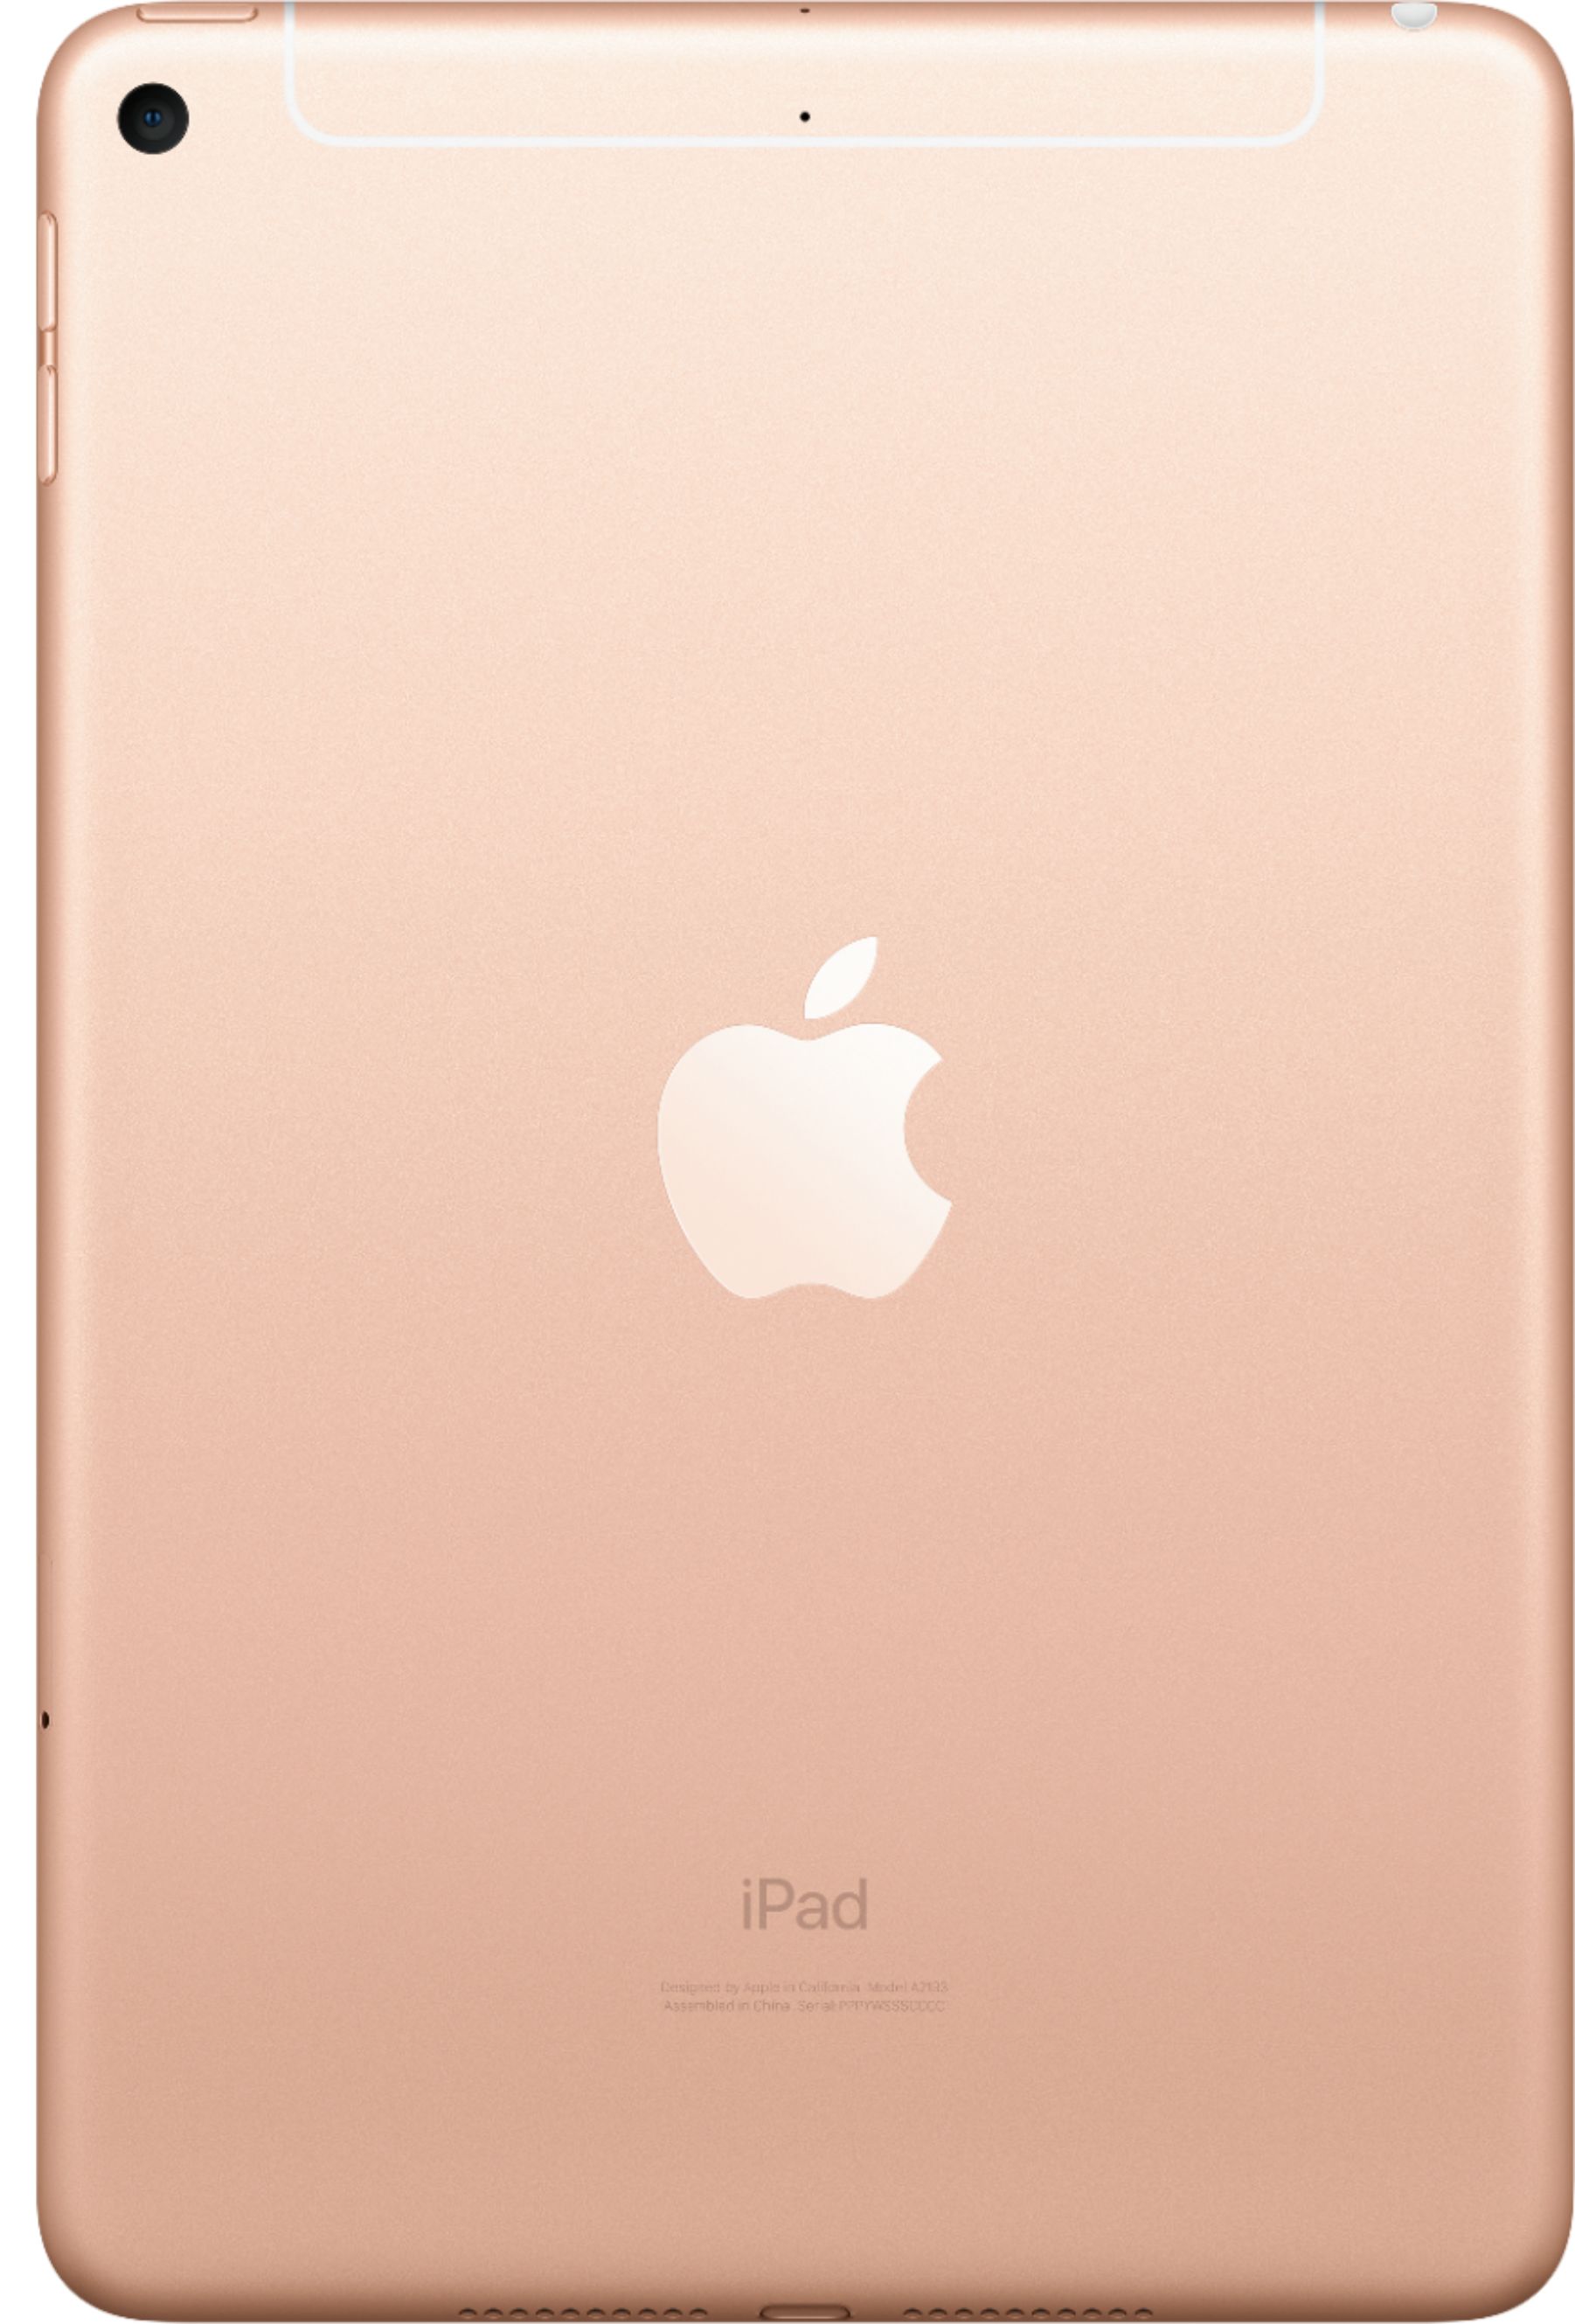 Back View: Apple - 12.9-Inch iPad Pro (Latest Model) with Wi-Fi - 2TB - Space Gray